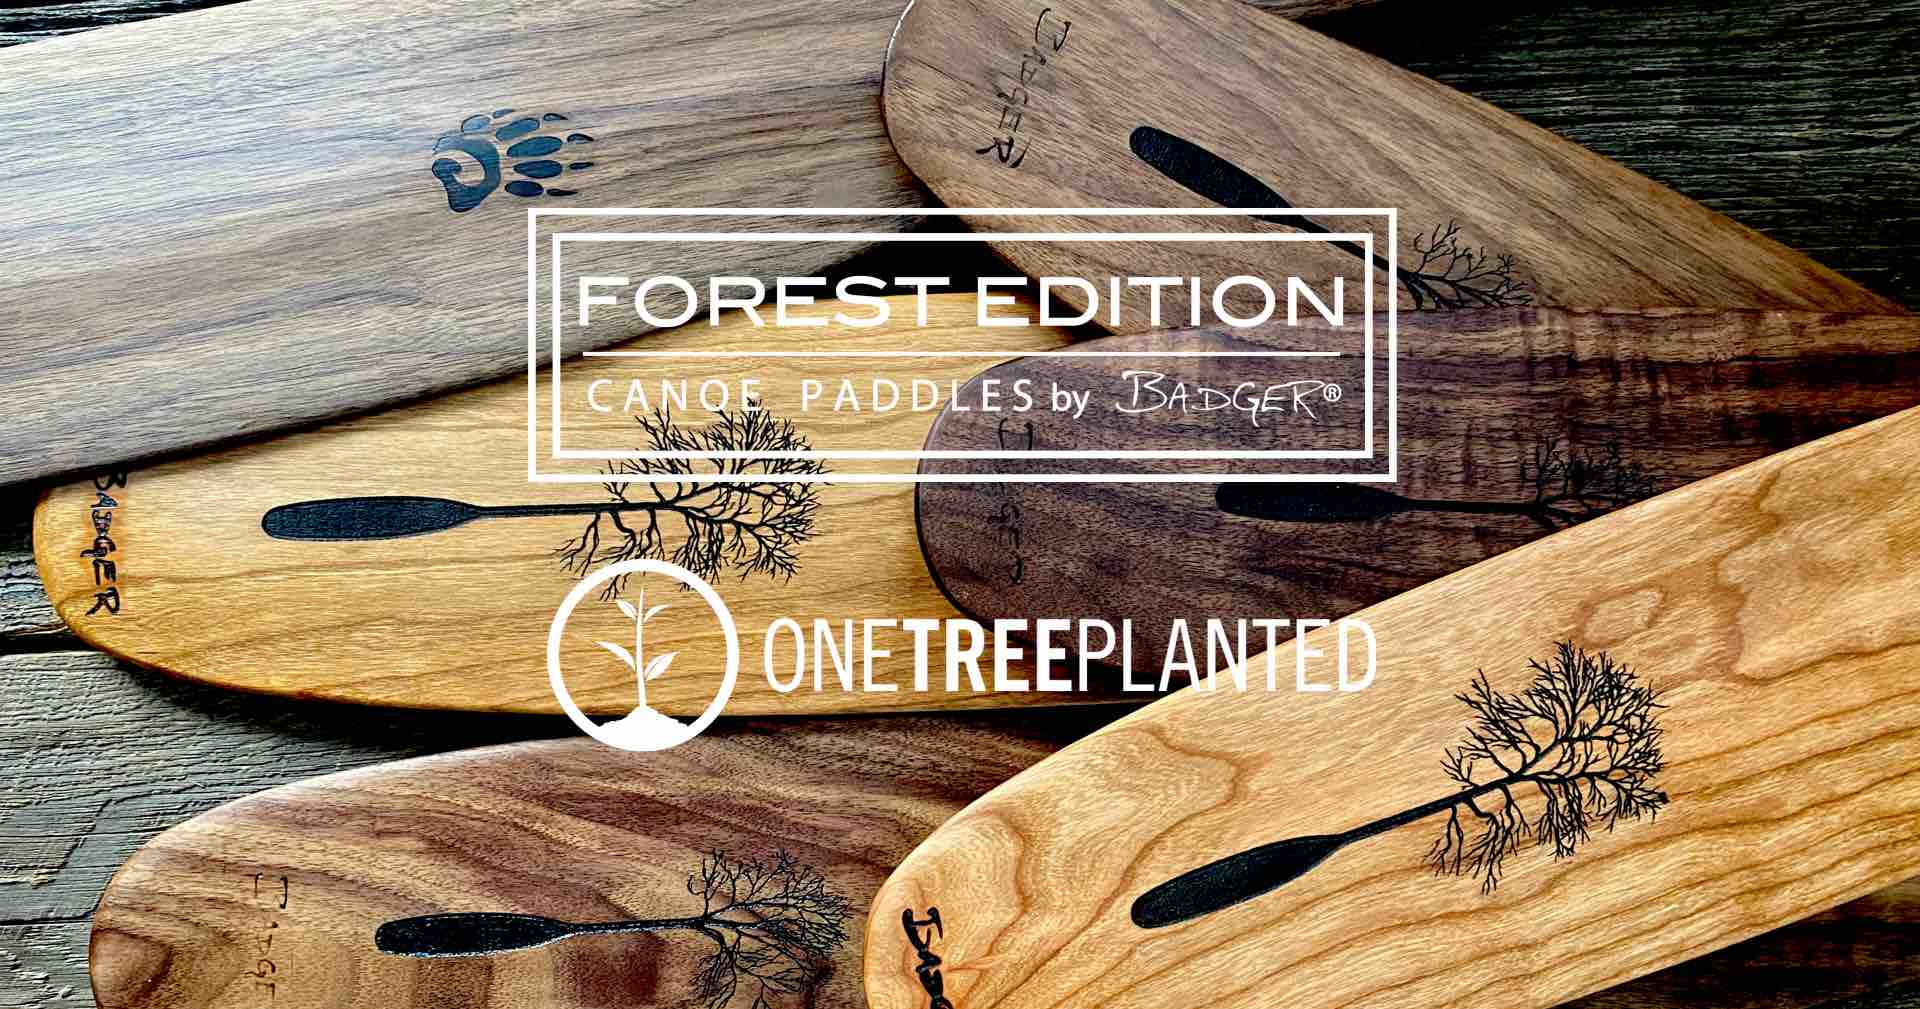 Collection of various cherry and walnut Forest Edition Canoe Paddles by Badger® featuring One Tree Planted